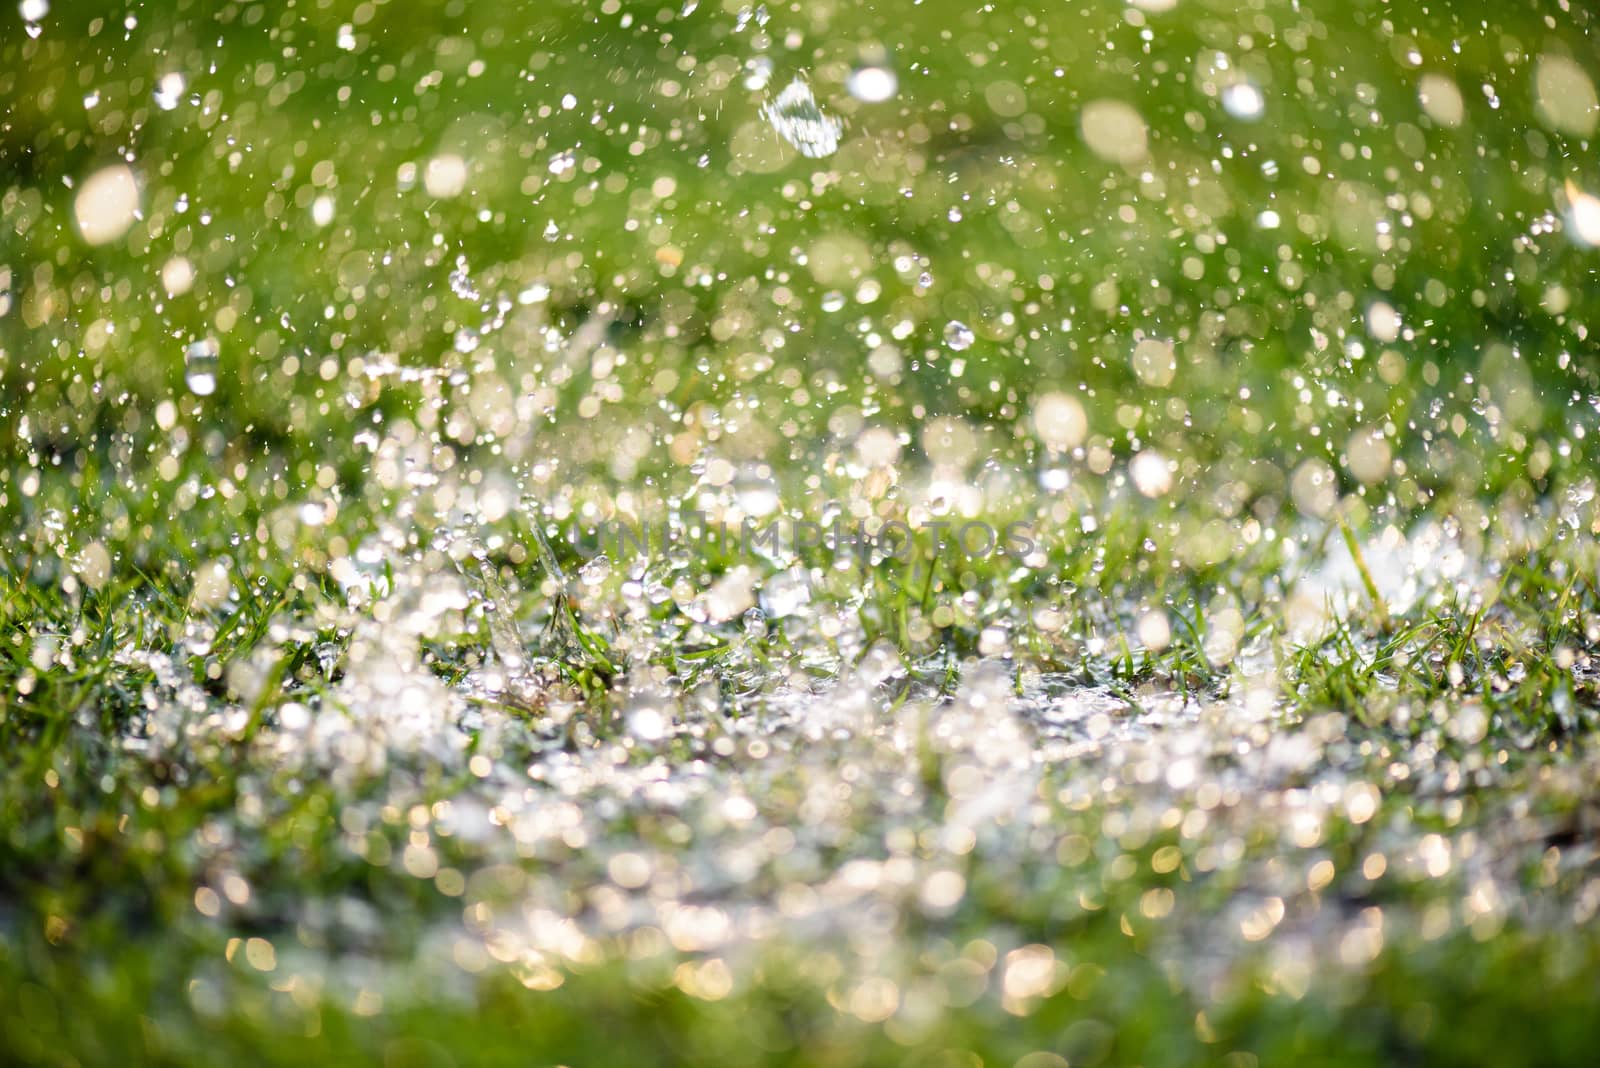 Soft focus of Close up heavy raining on green grass field in Fre by spukkato